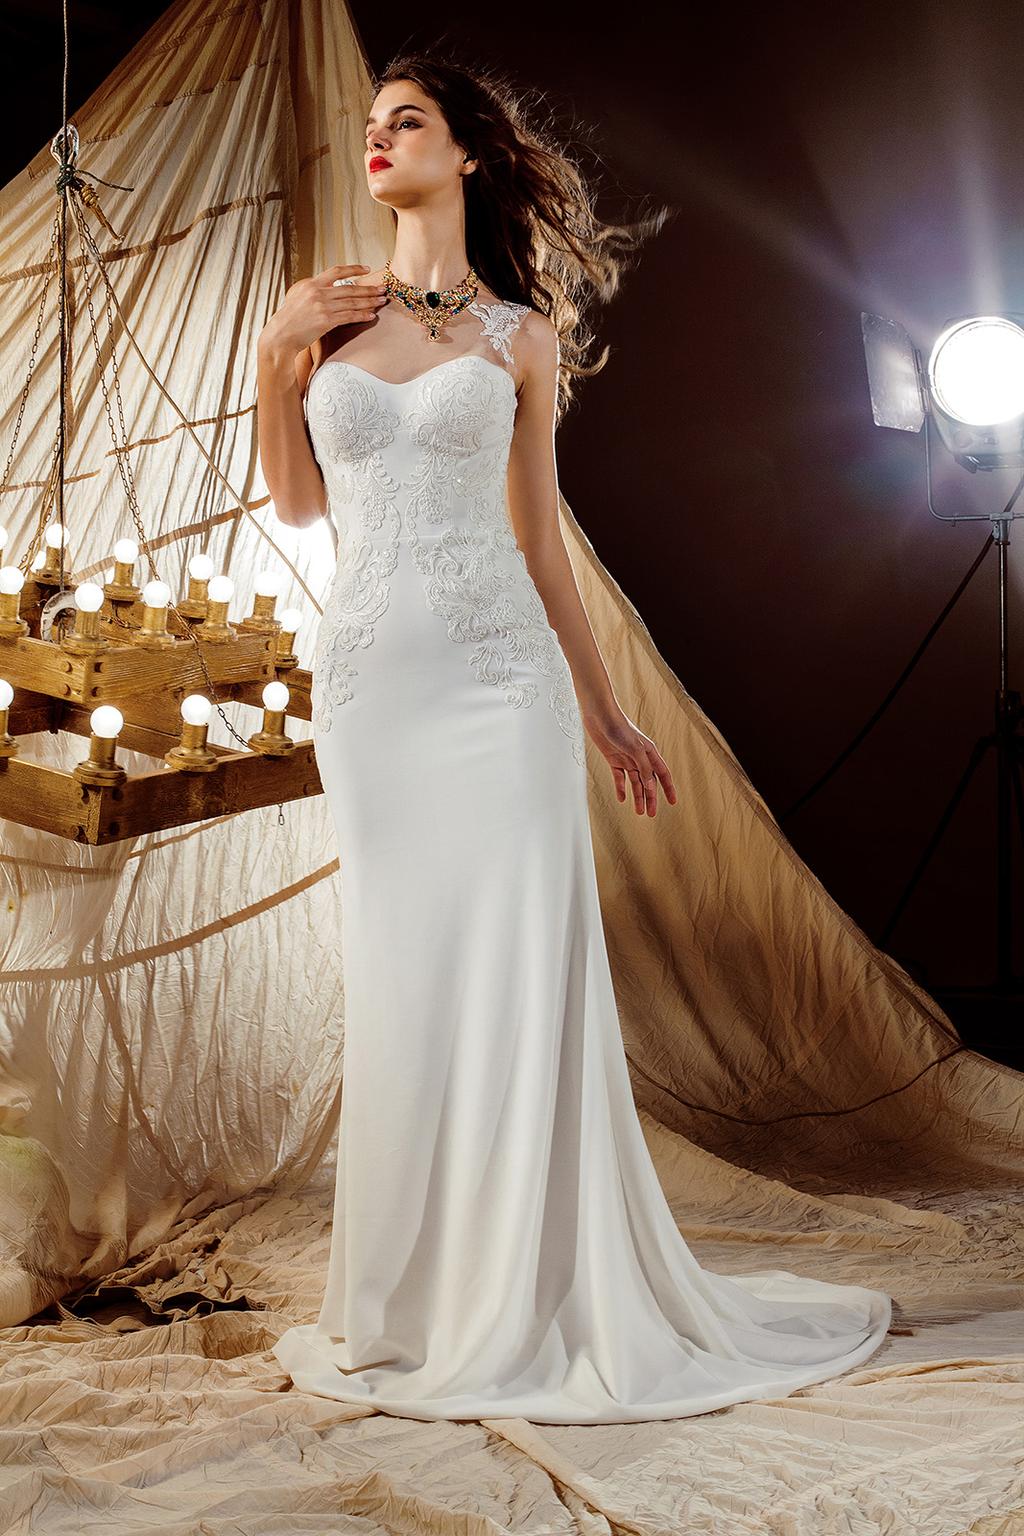 Vanessa Wholesale price: $310 Straight cut dress, made of satin with a little train, perfectly embraces the silhouette of the bride.